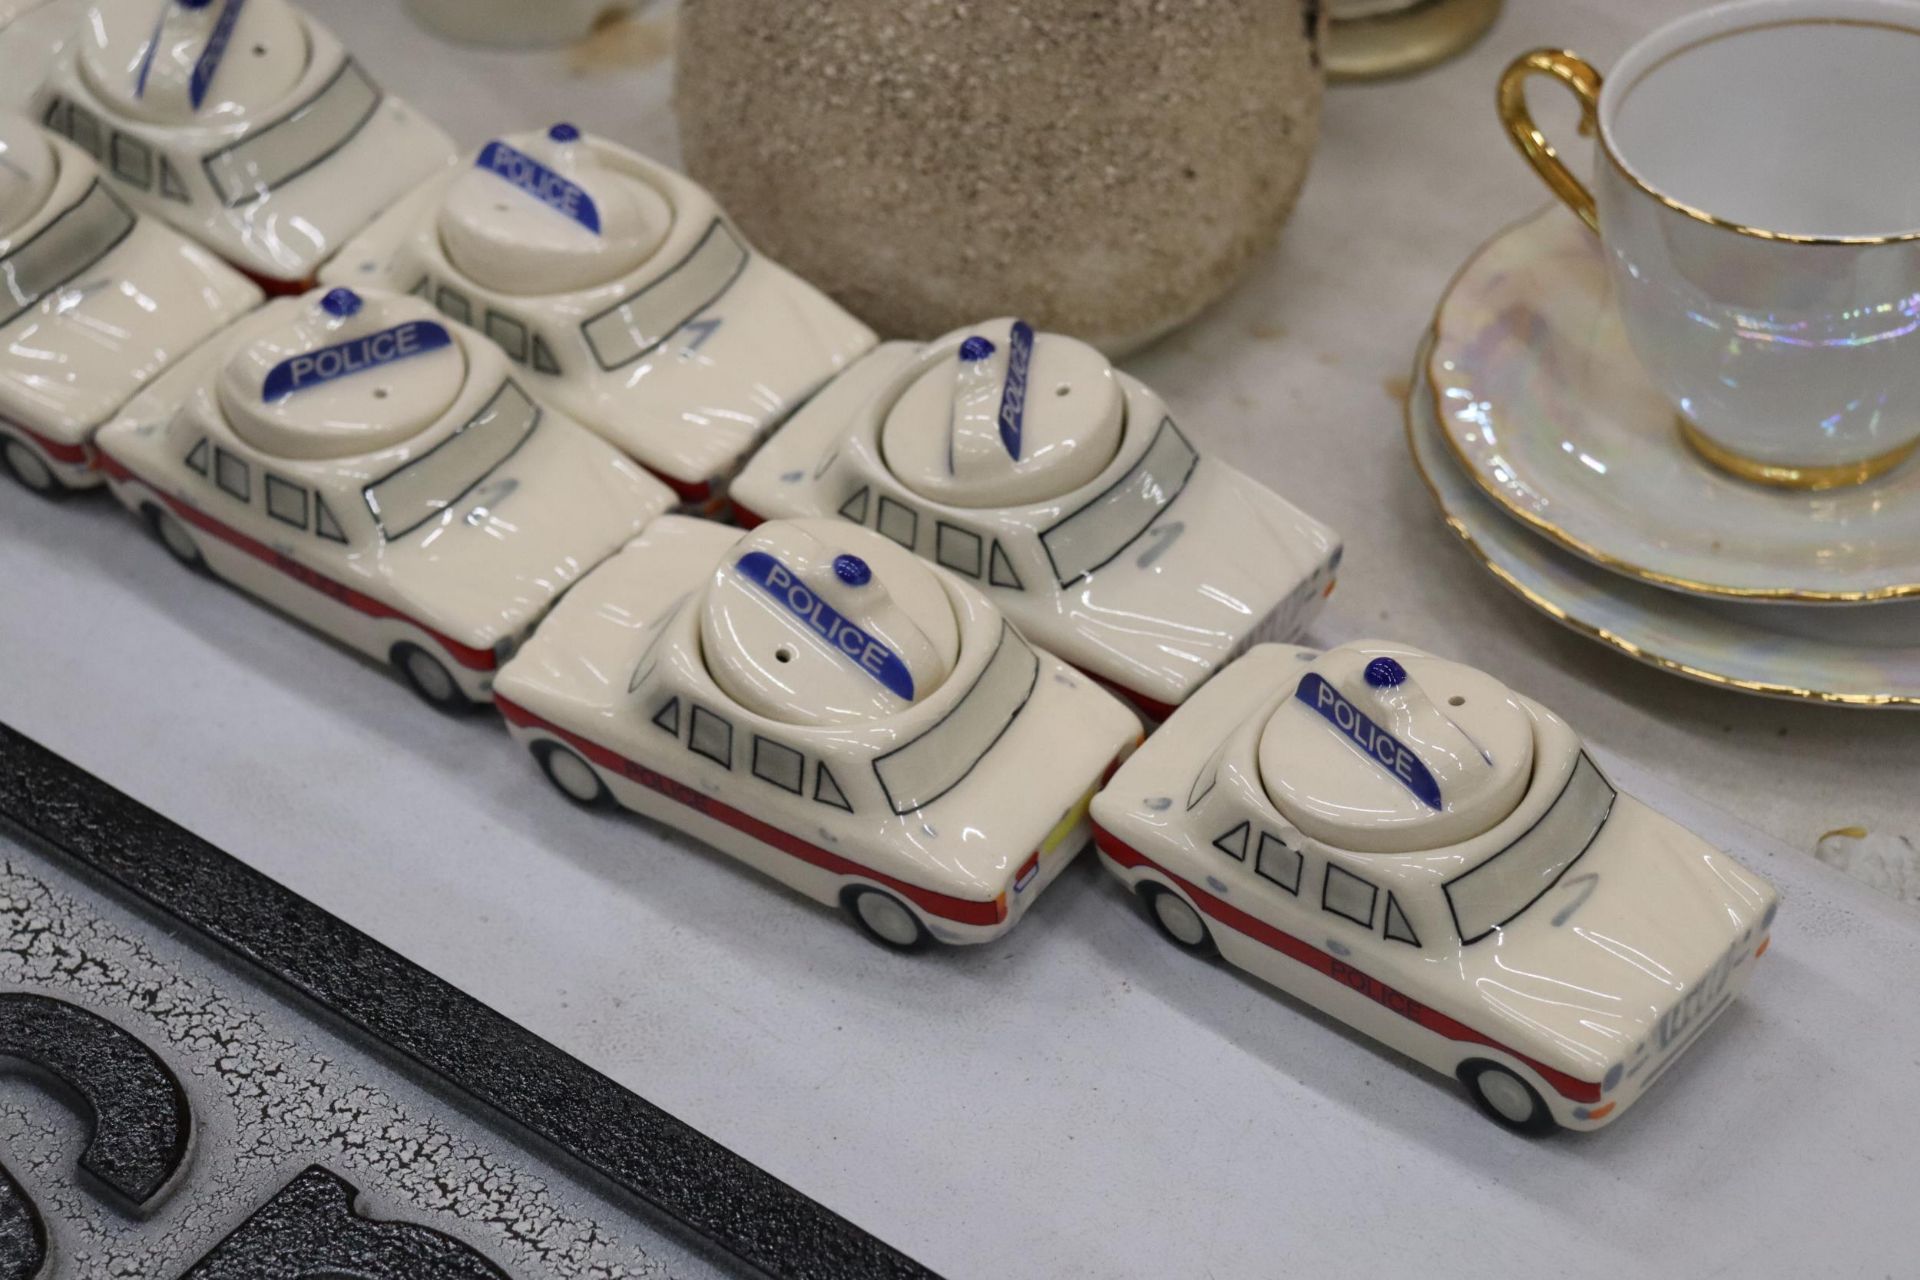 THIRTEEN POLICE CAR EGG CUPS WITH SALT POT FOR LID - Image 2 of 6